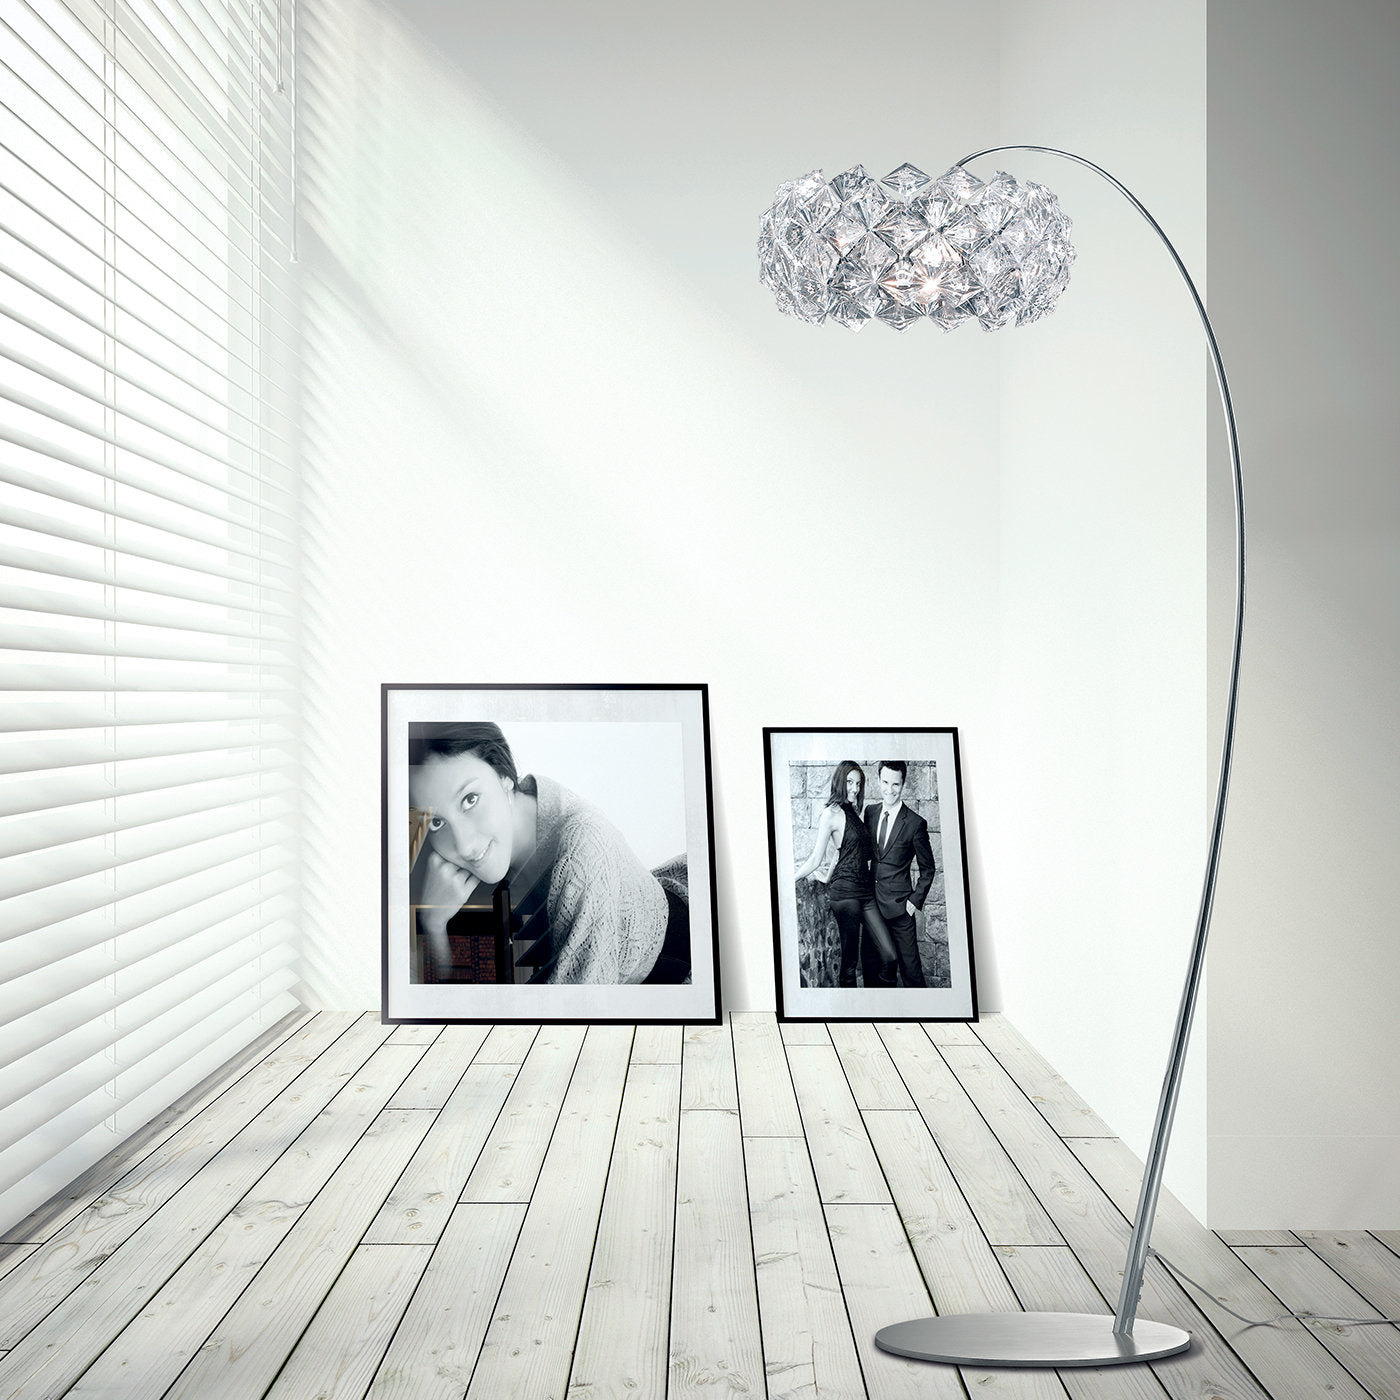 0821/LT Multi-Faceted Curved Floor Lamp - Alternative view 1